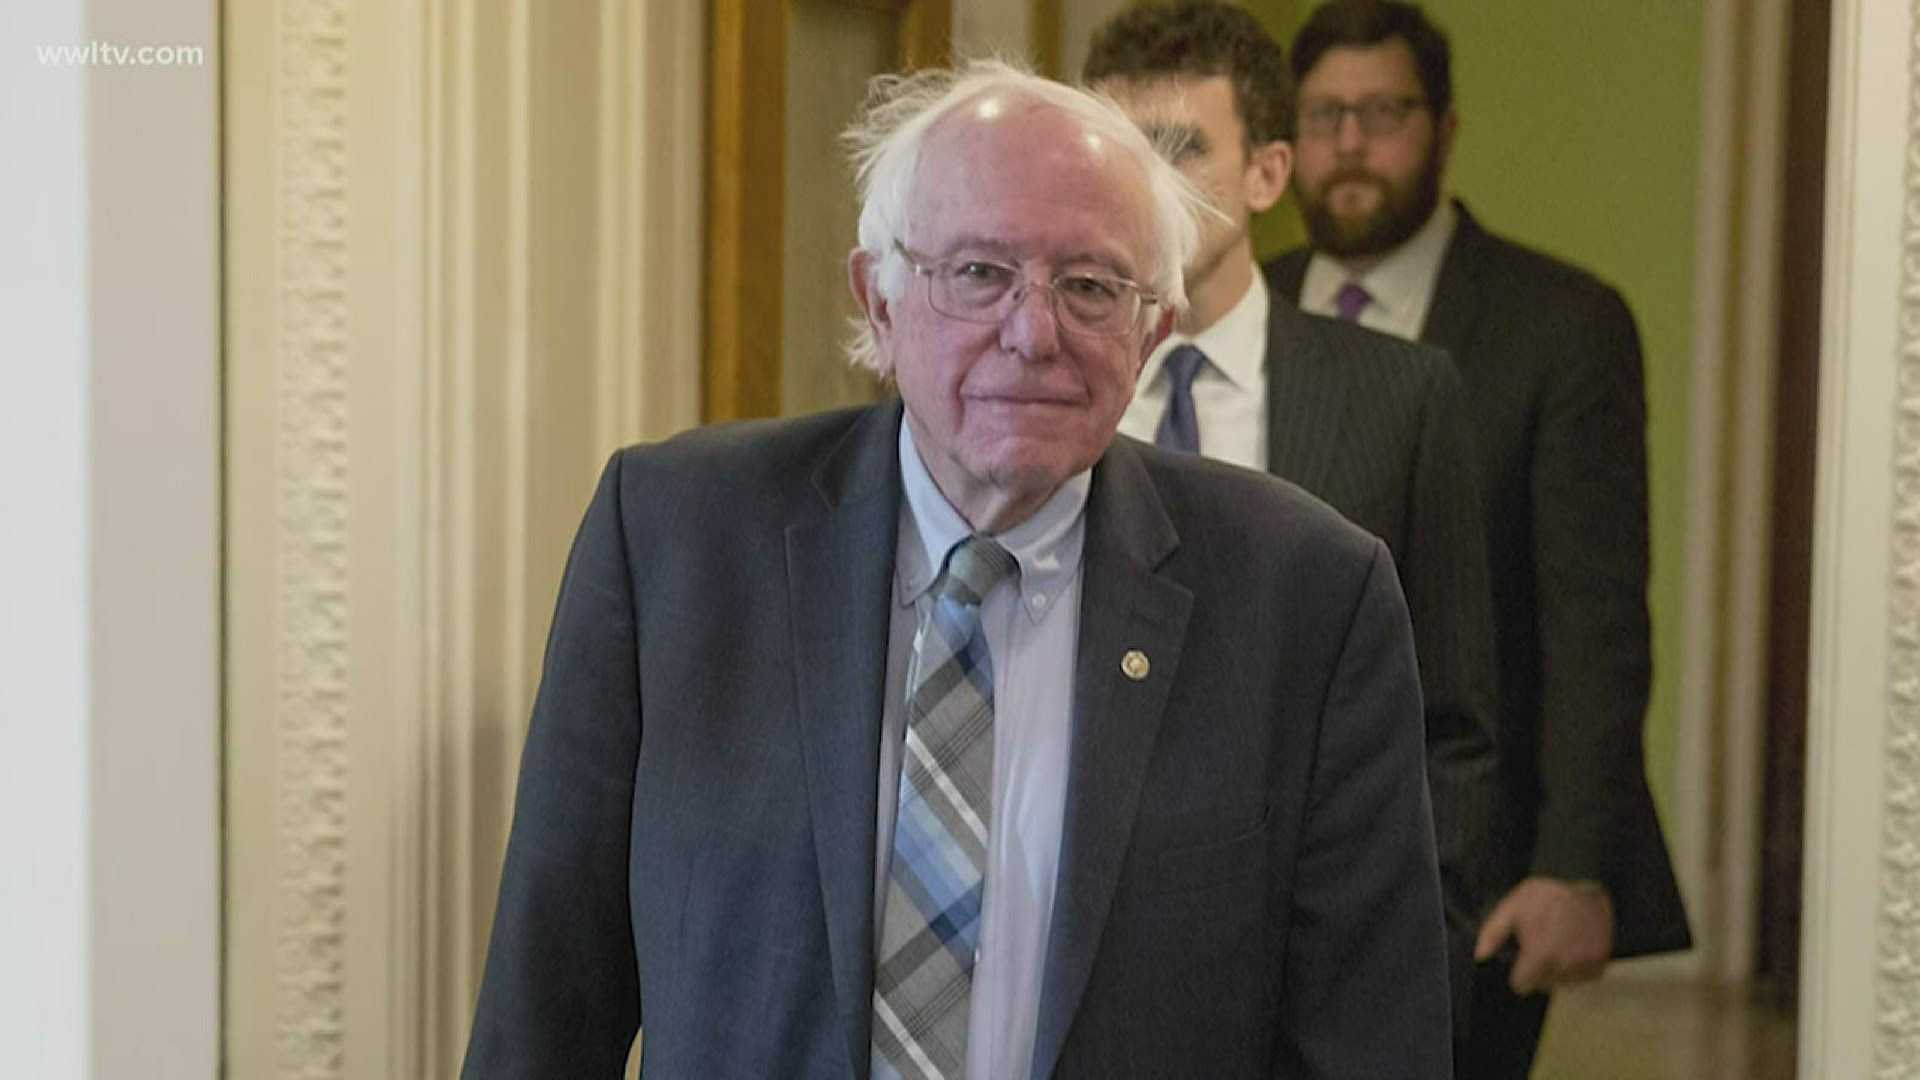 Bernie Sanders announced via livestream today he'll drop out of the race for president, but won't give up his delegates. Charisse Gibson reports.